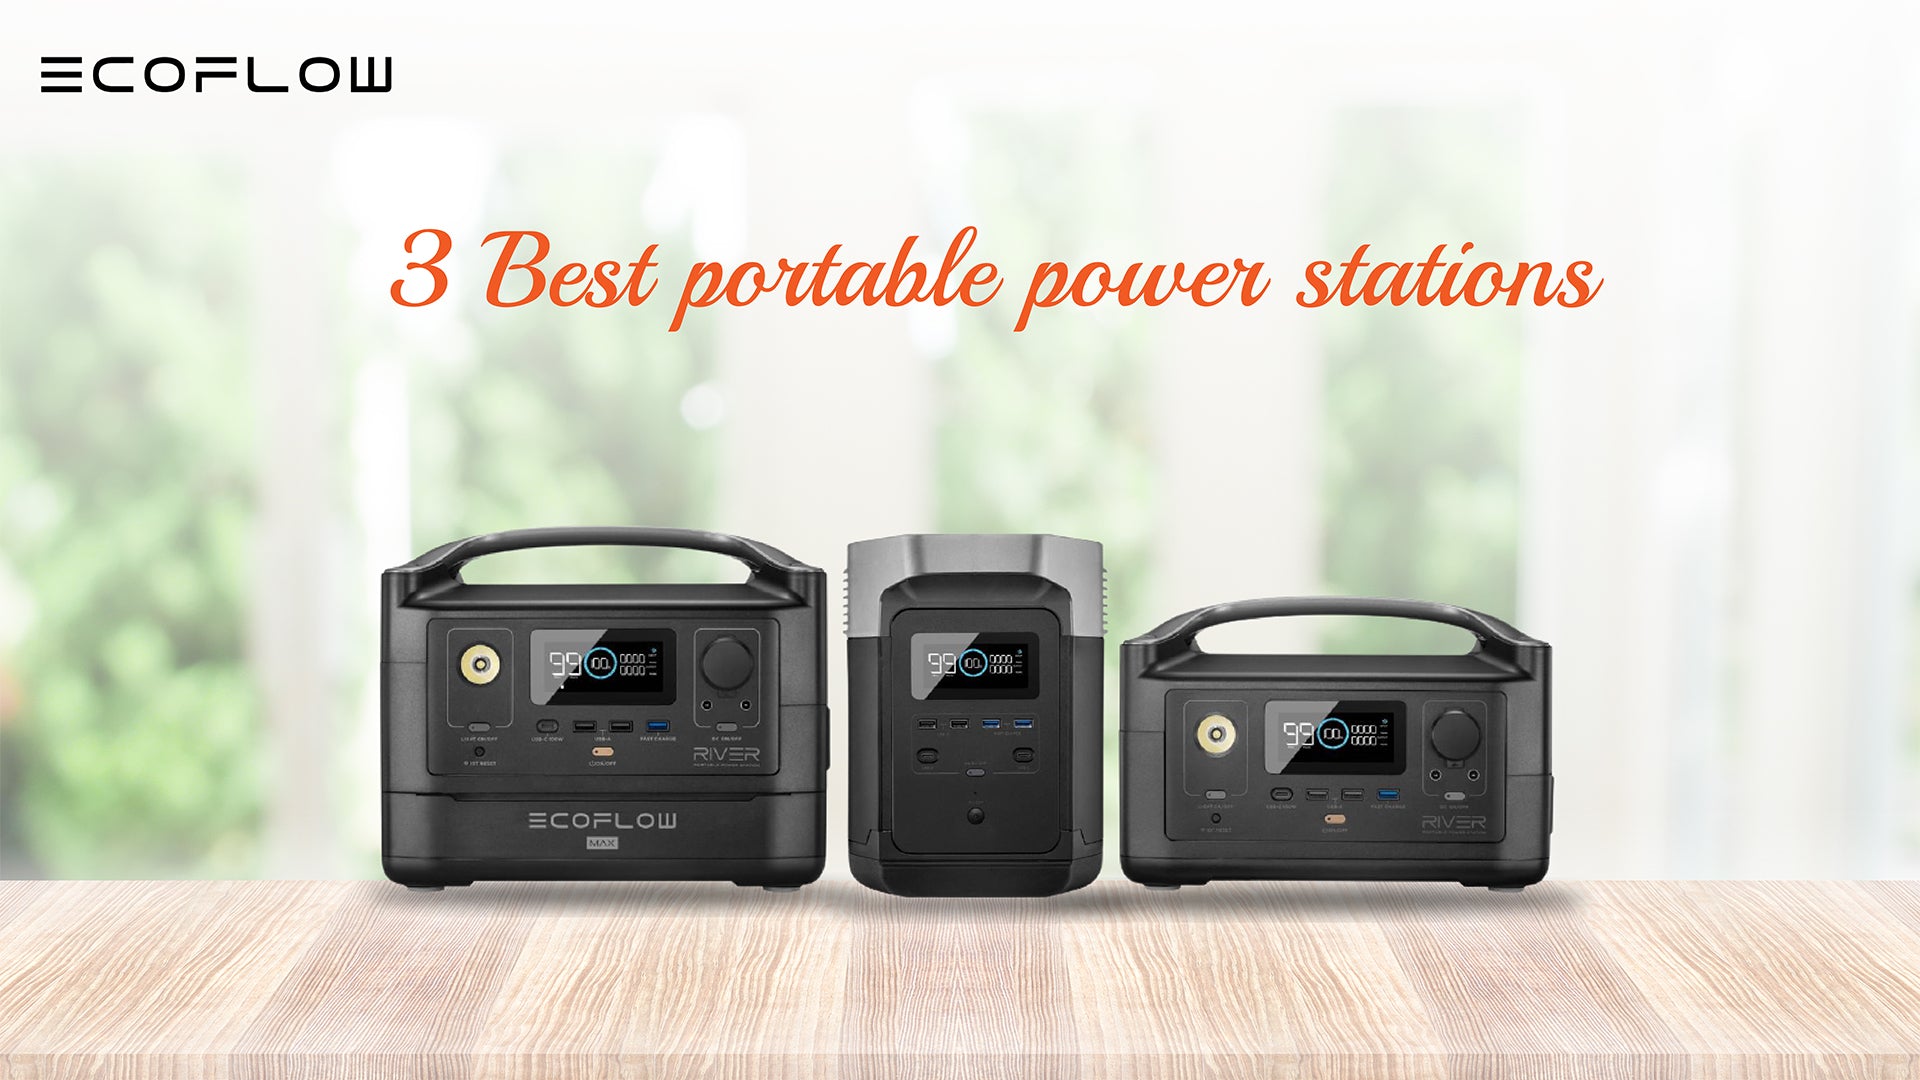 The 3 Best Portable Power Stations